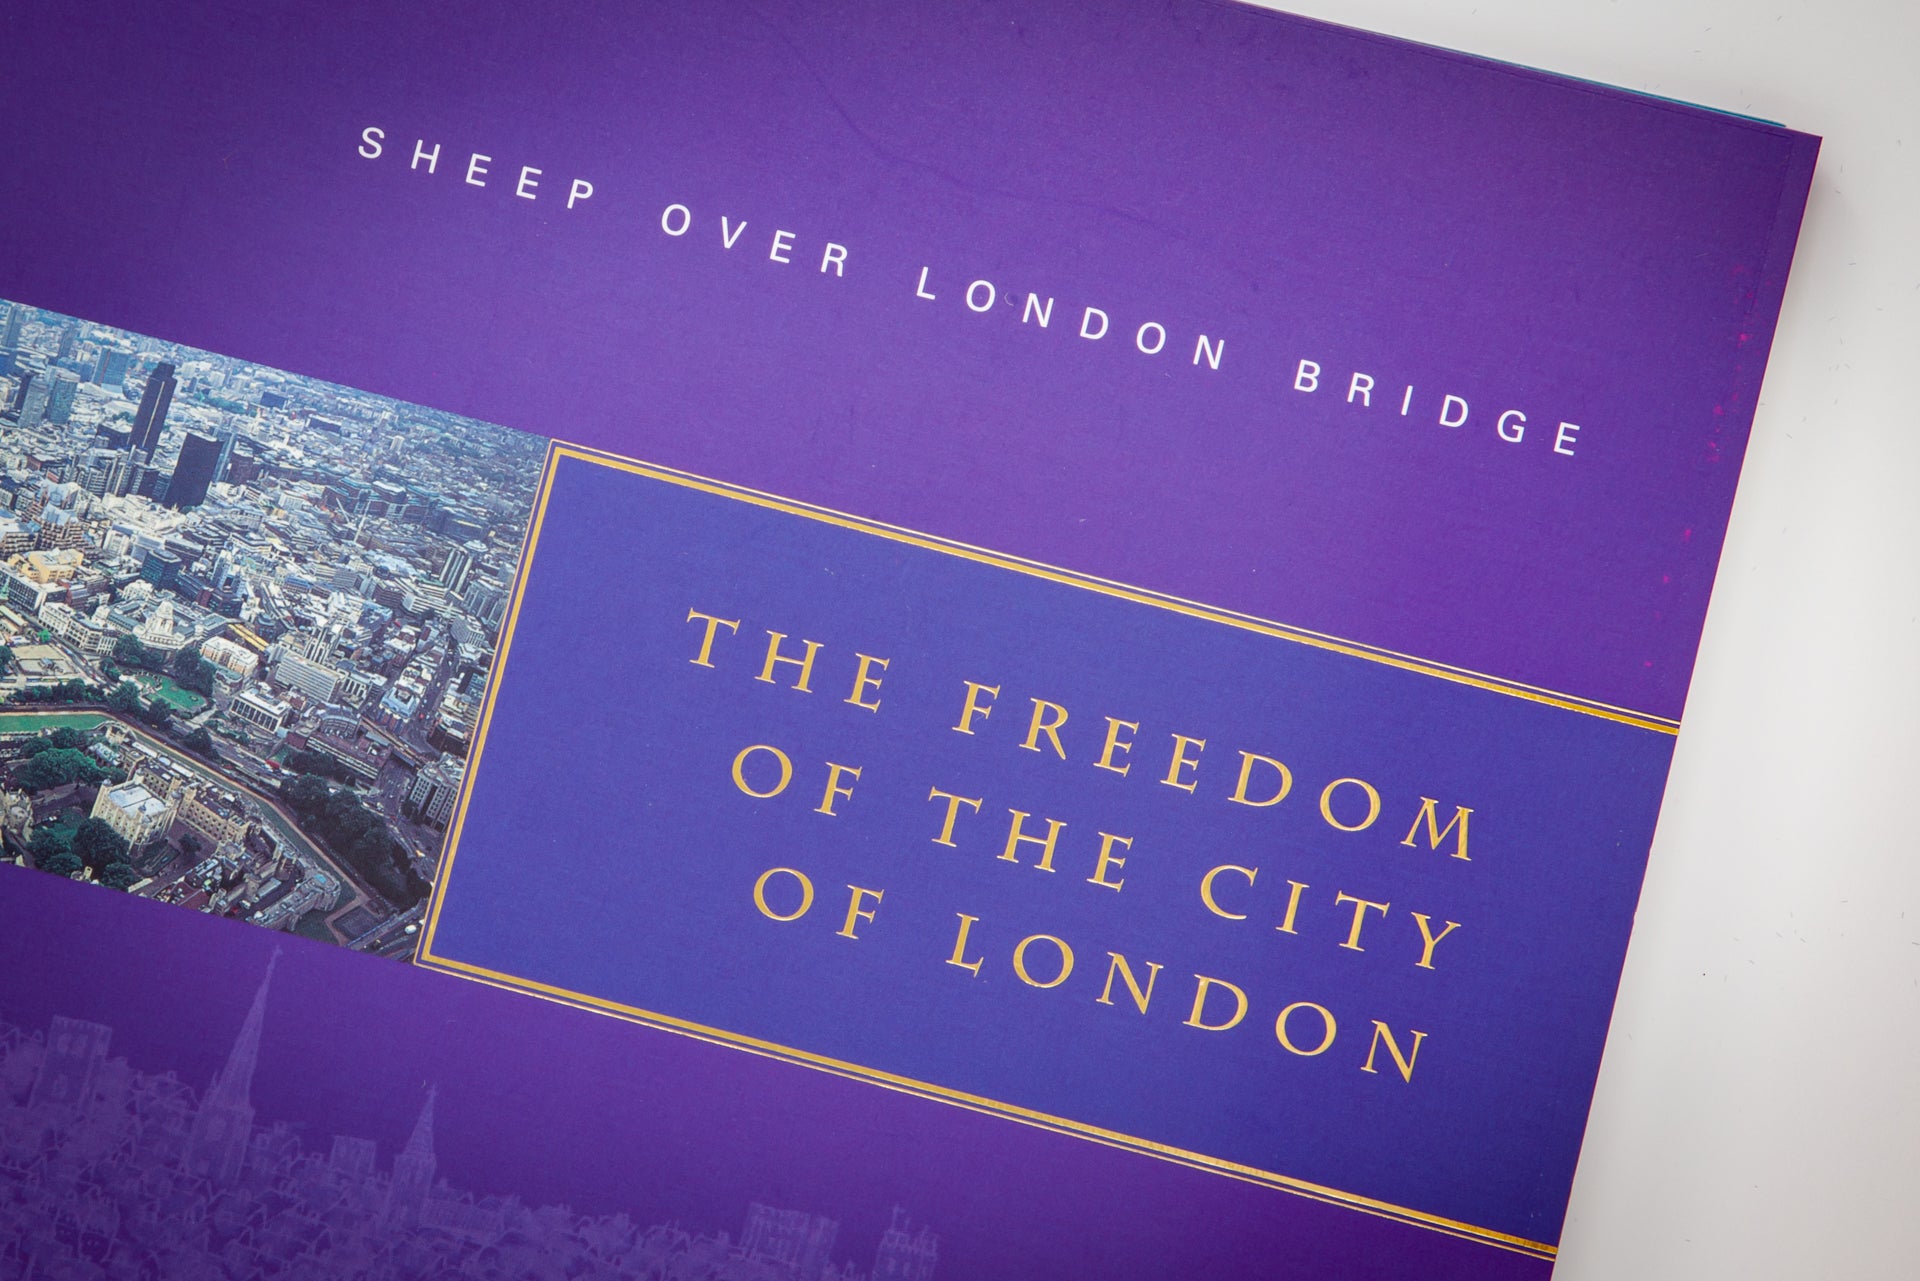 Sheep Over London Bridge - The Freedom of the City of London